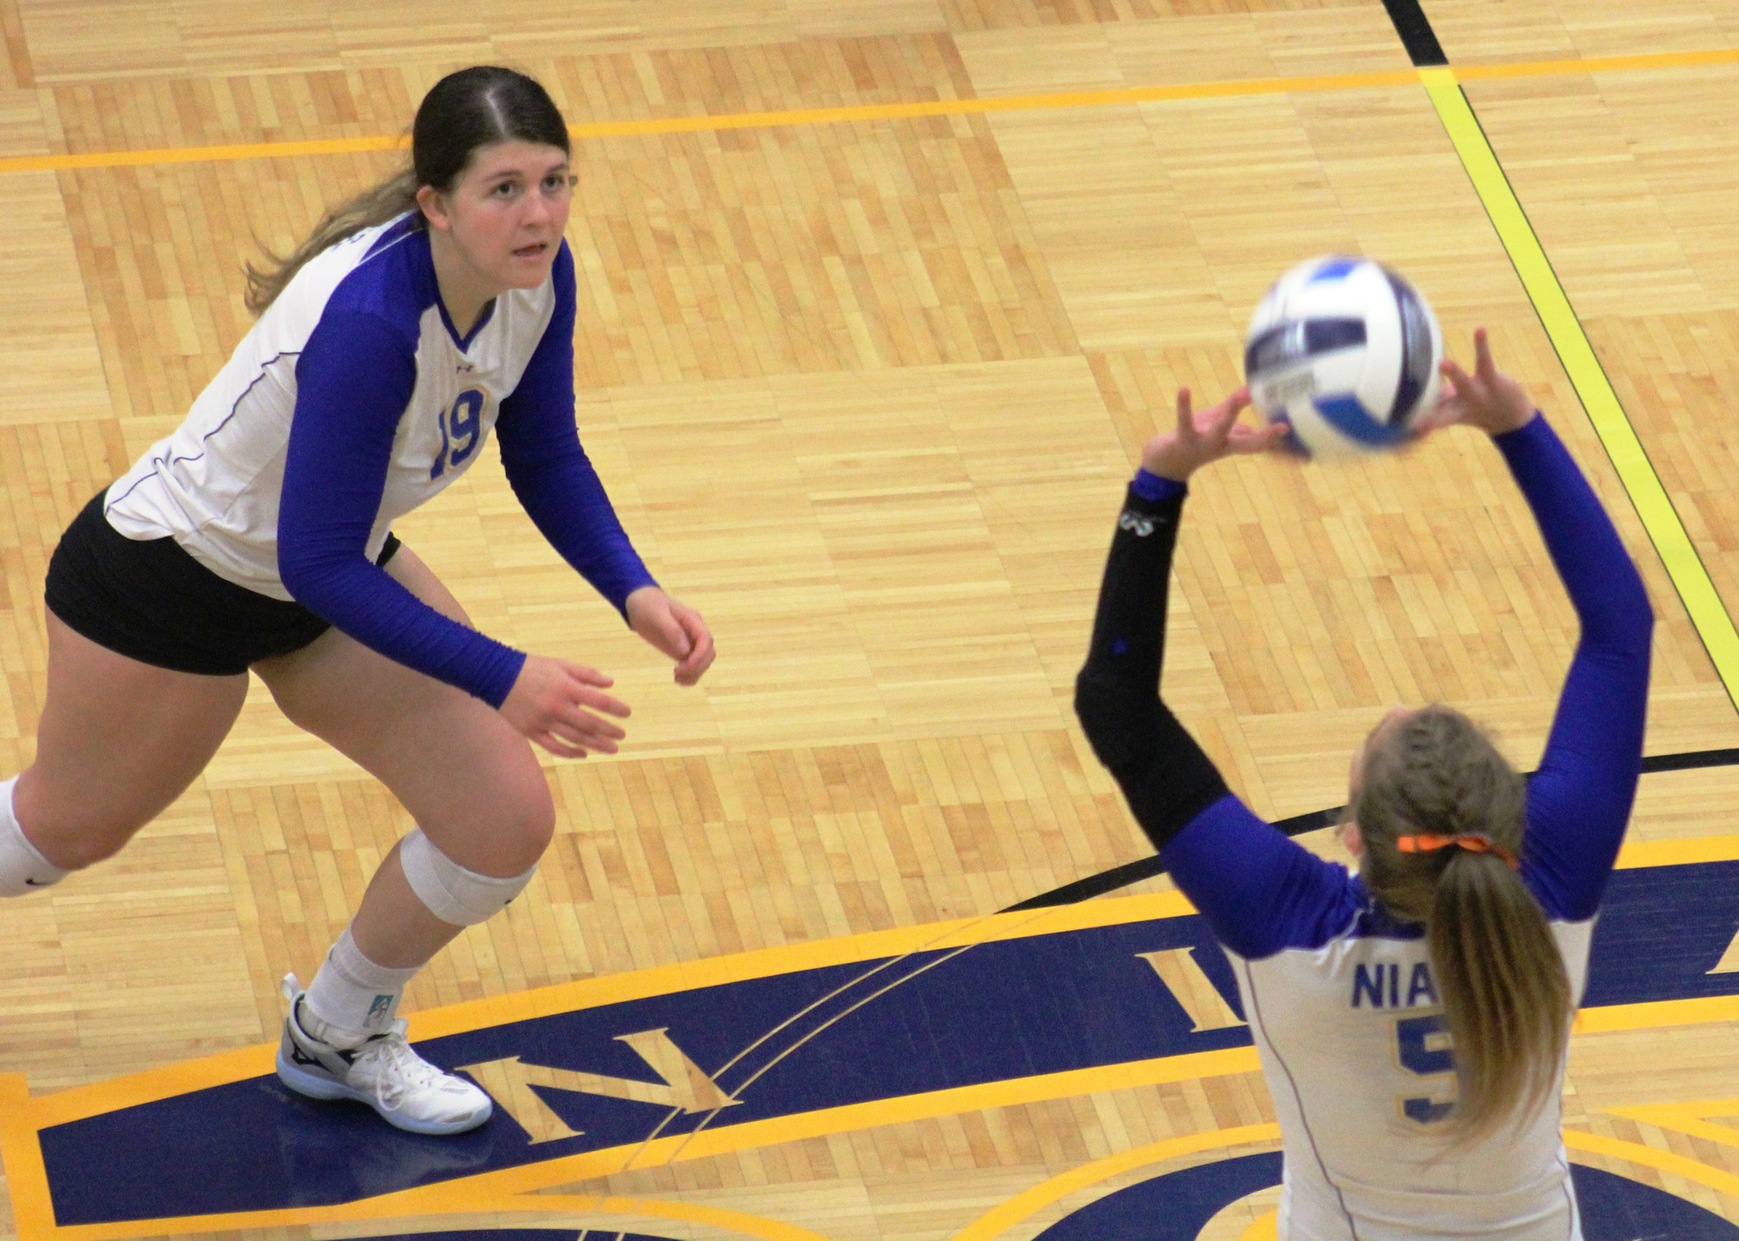 NIACC's Becca Steffen sets the ball as Braylee Wood looks on during Friday's match against DCTC.